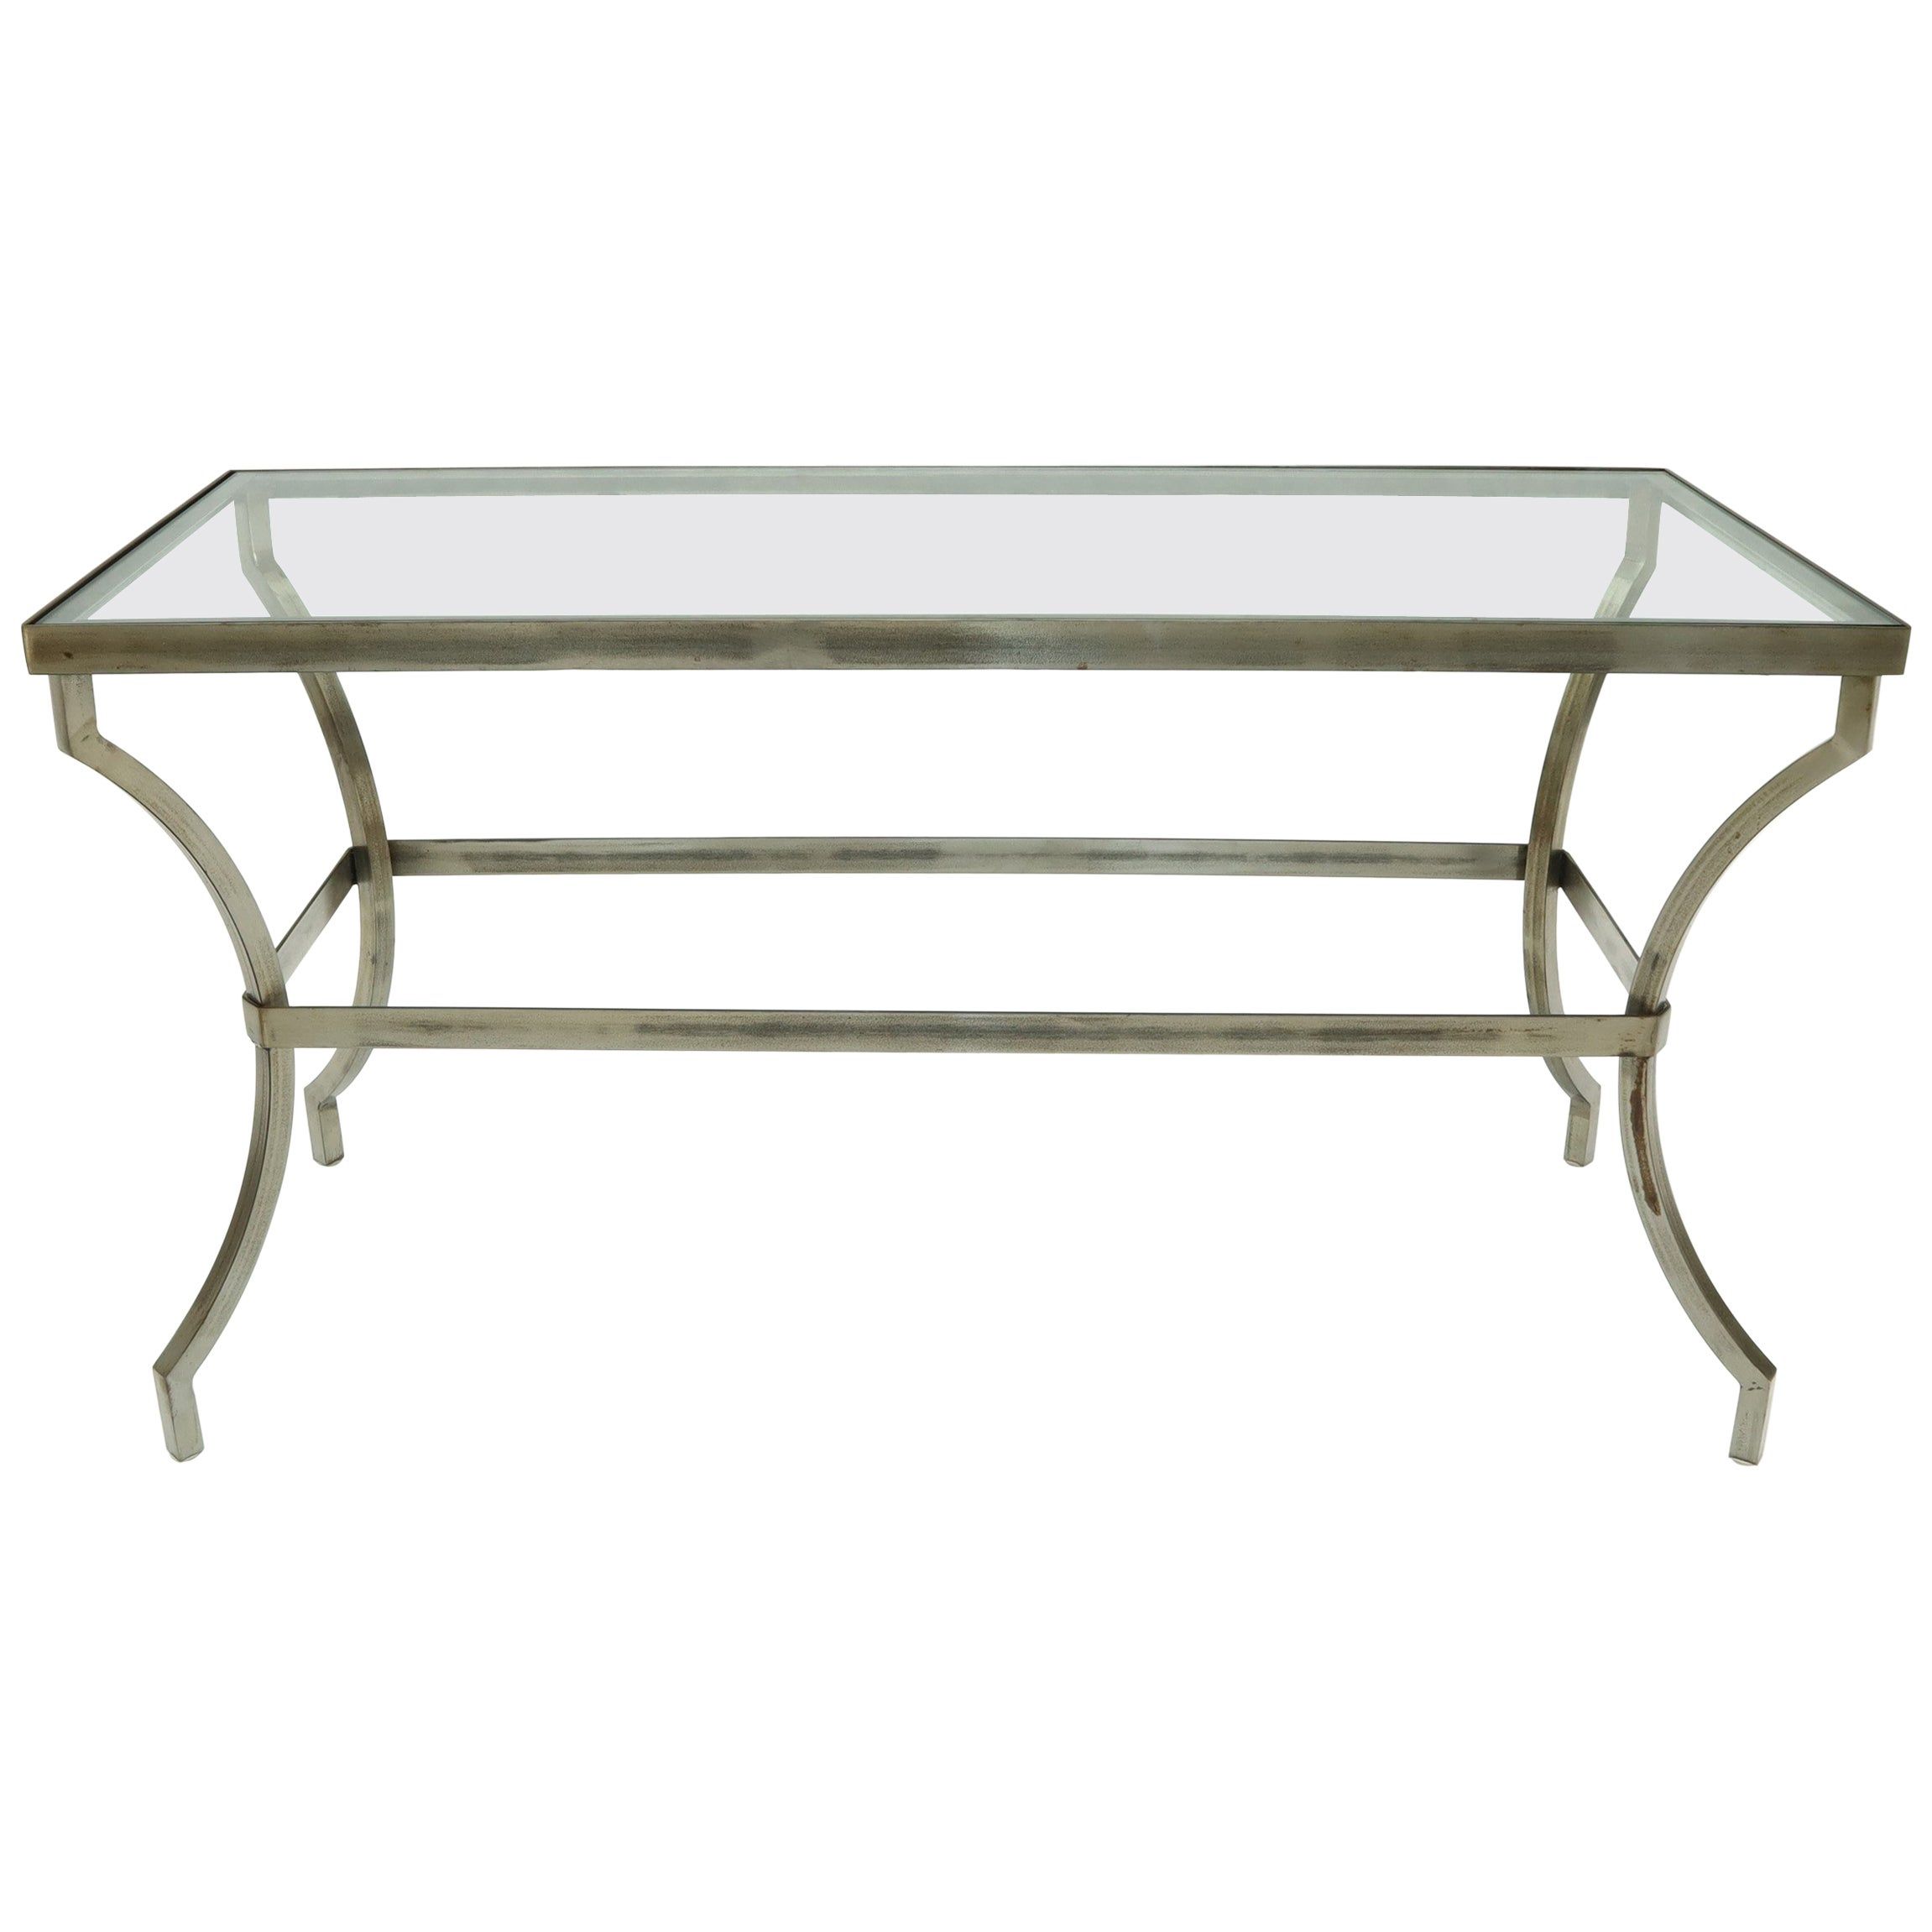 Vintage Heavy Industrial Steel Wood Console Table At 1stdibs Pertaining To Oval Corn Straw Rope Console Tables (View 12 of 20)